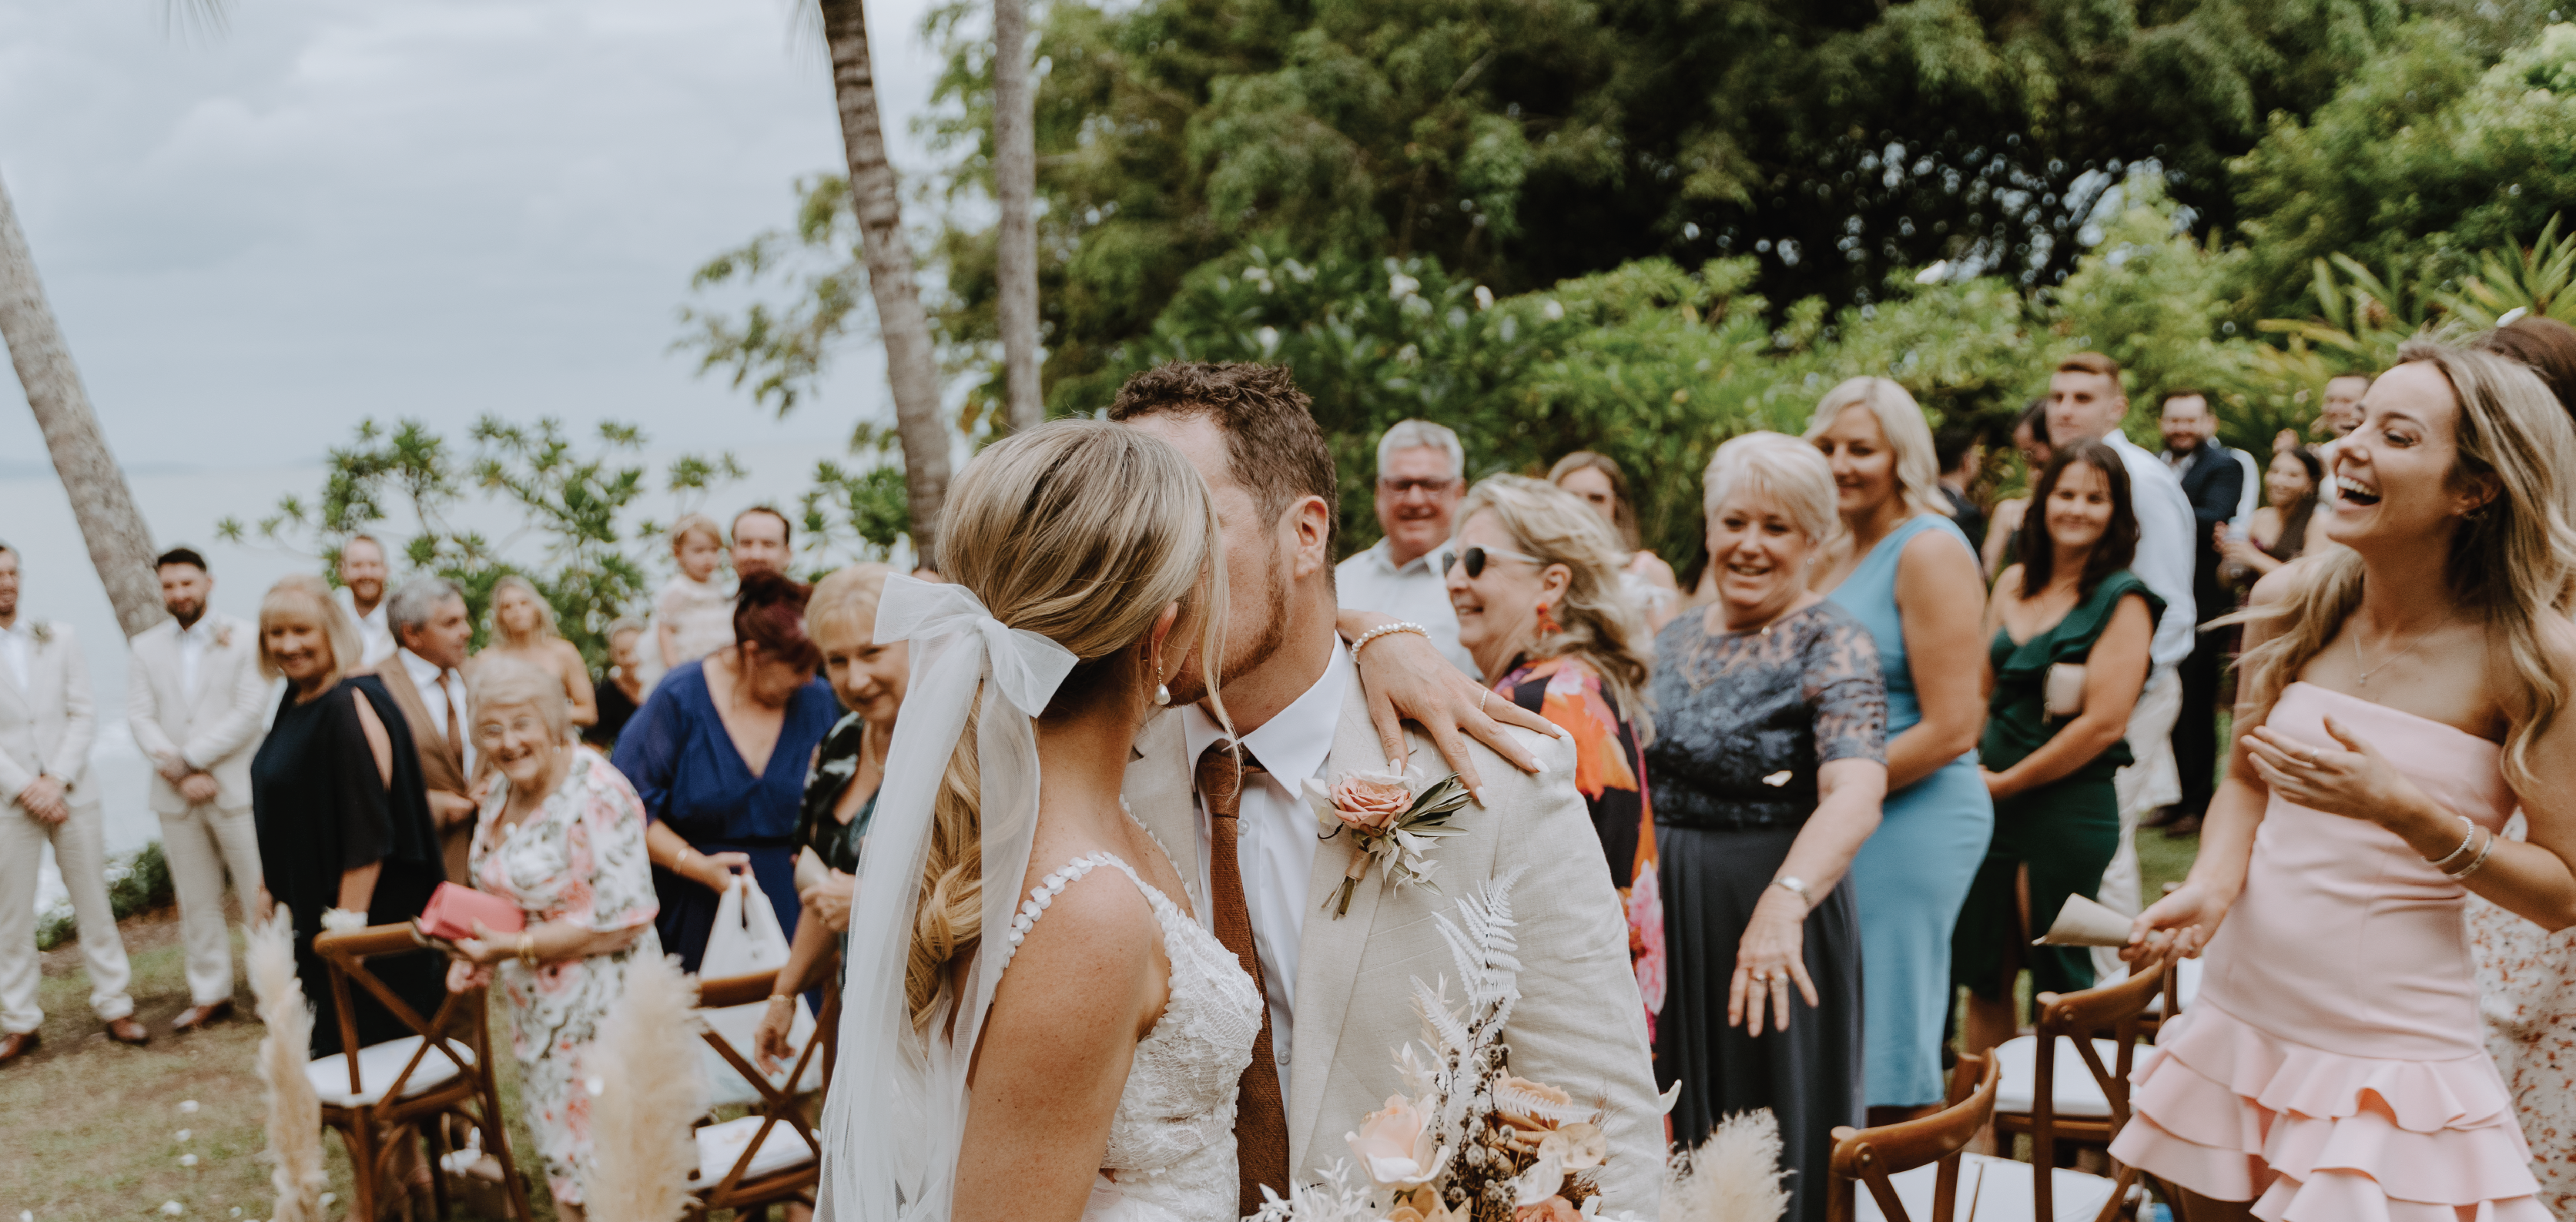 Paige Whyte Marriage Celebrant in Port Douglas Little Cove